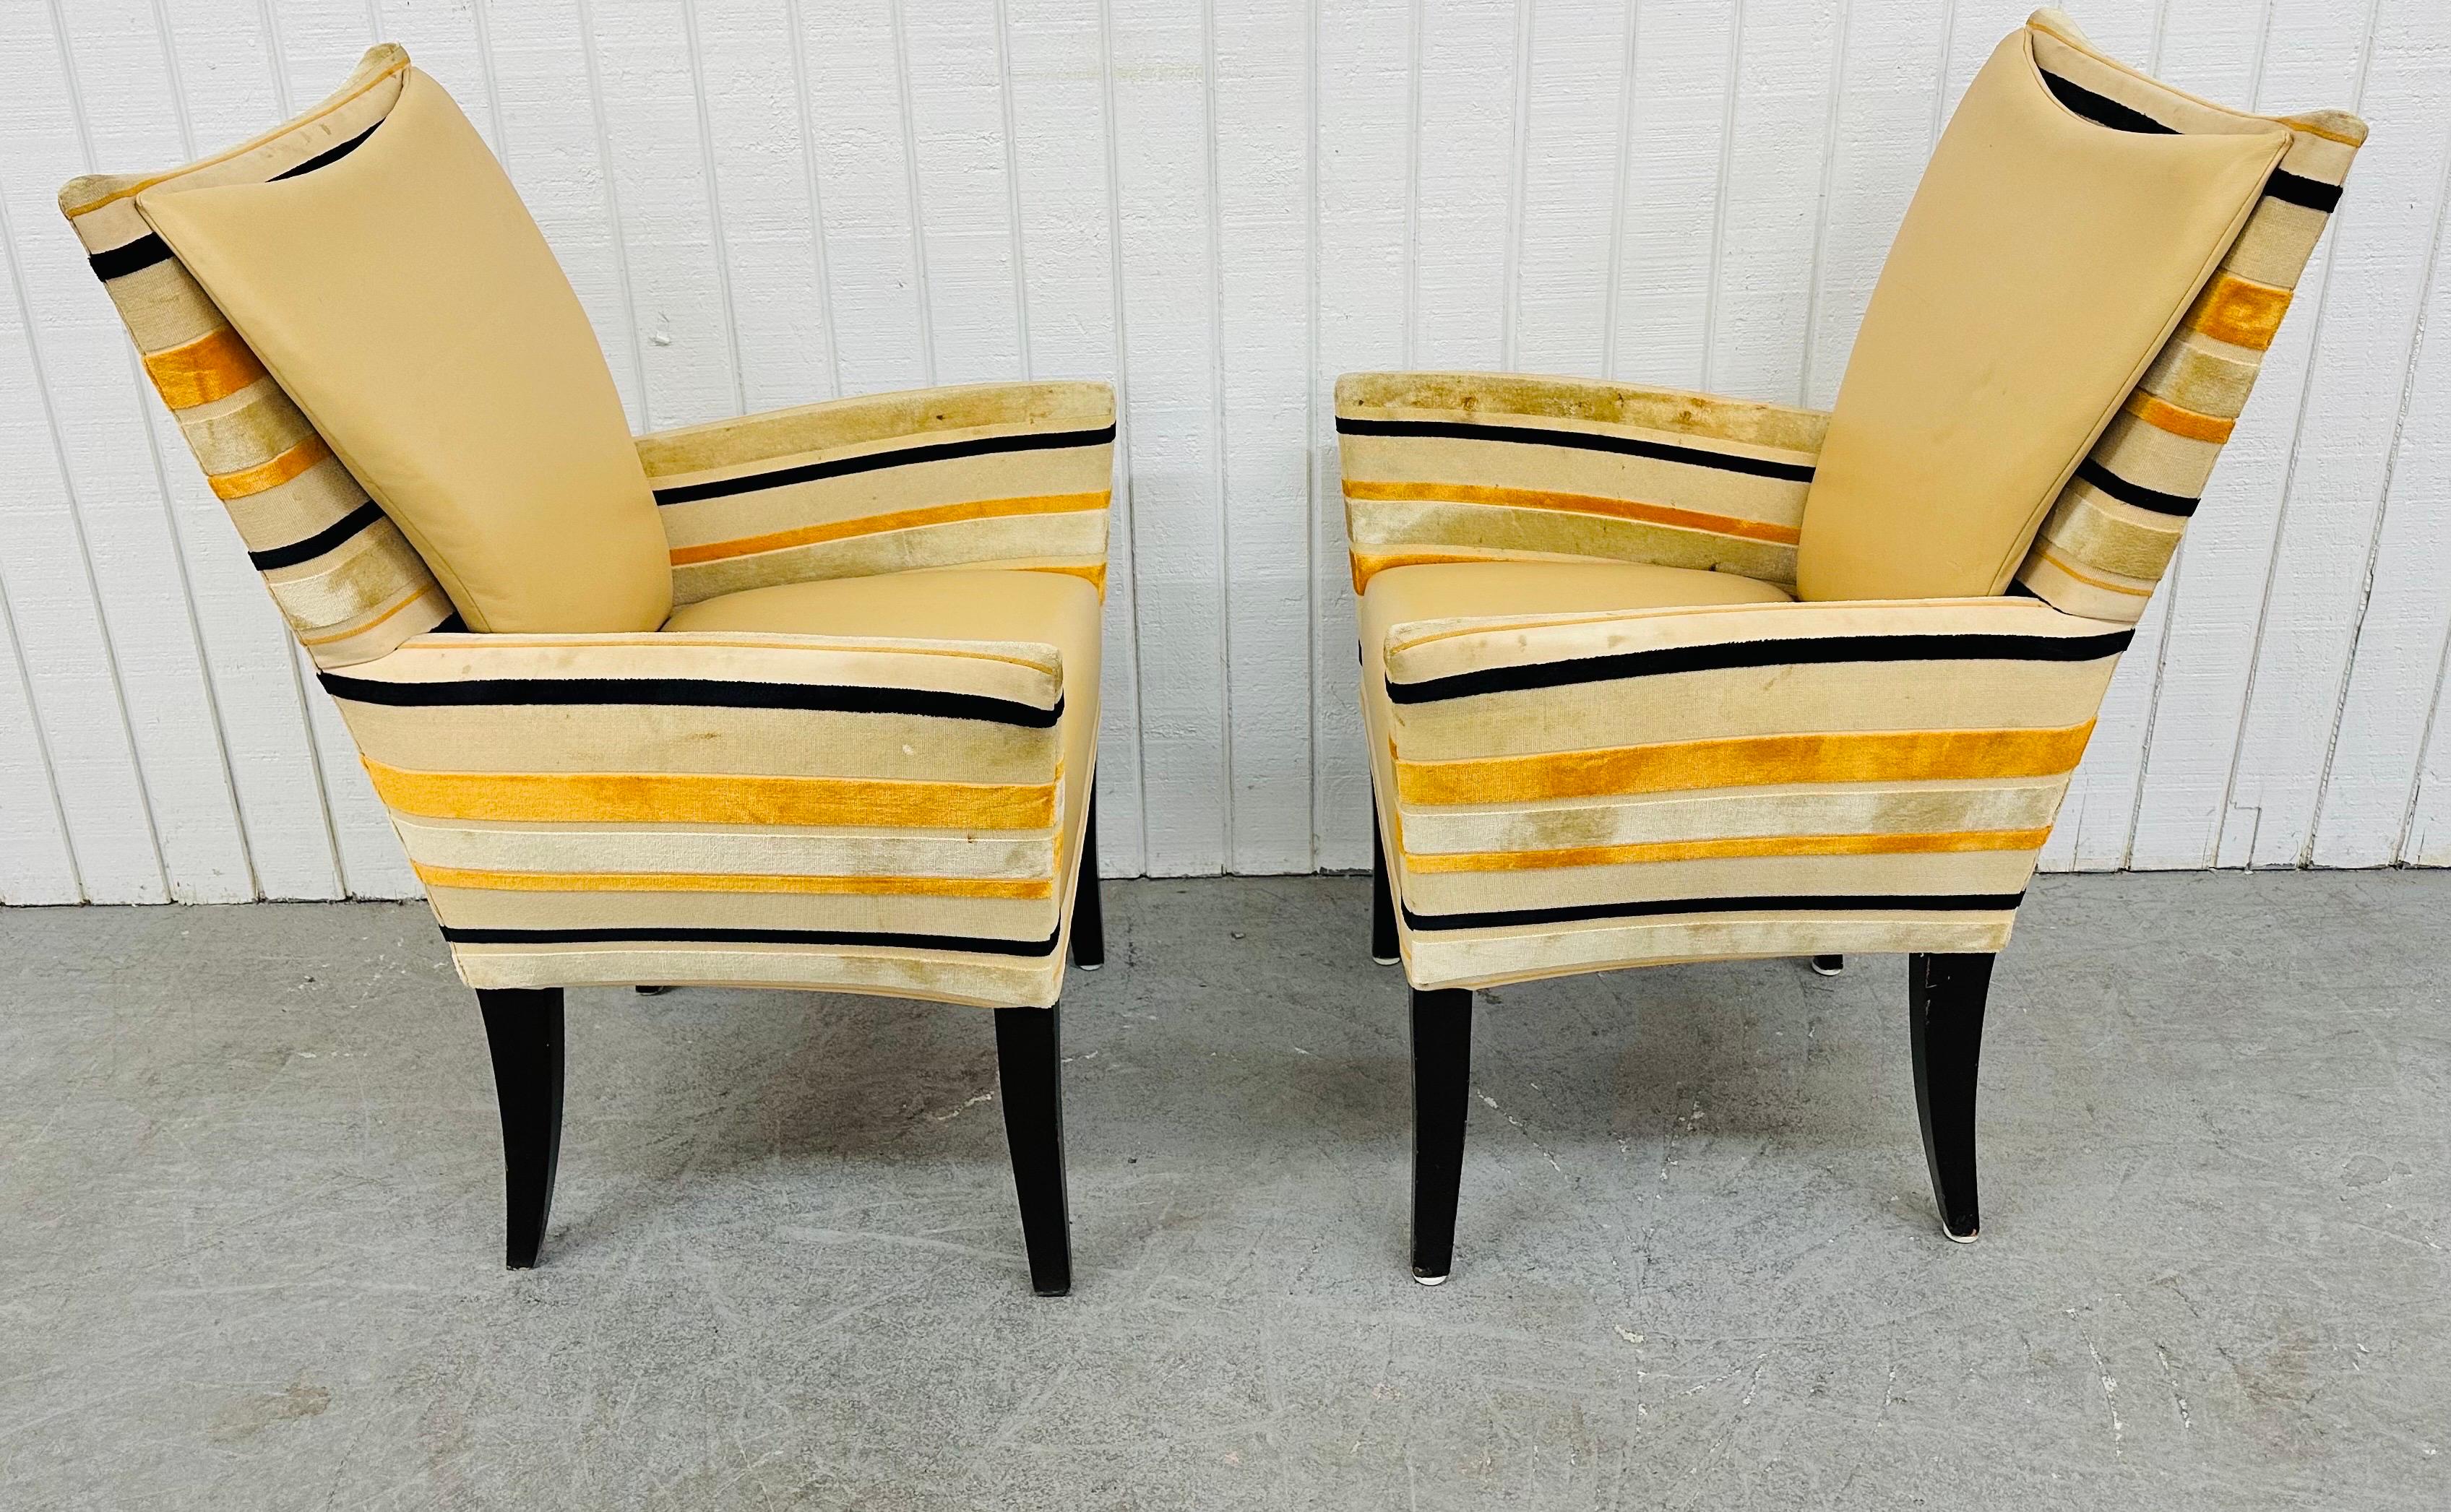 Vintage Deco Style Lounge Chairs - Set of 2 In Good Condition For Sale In Clarksboro, NJ